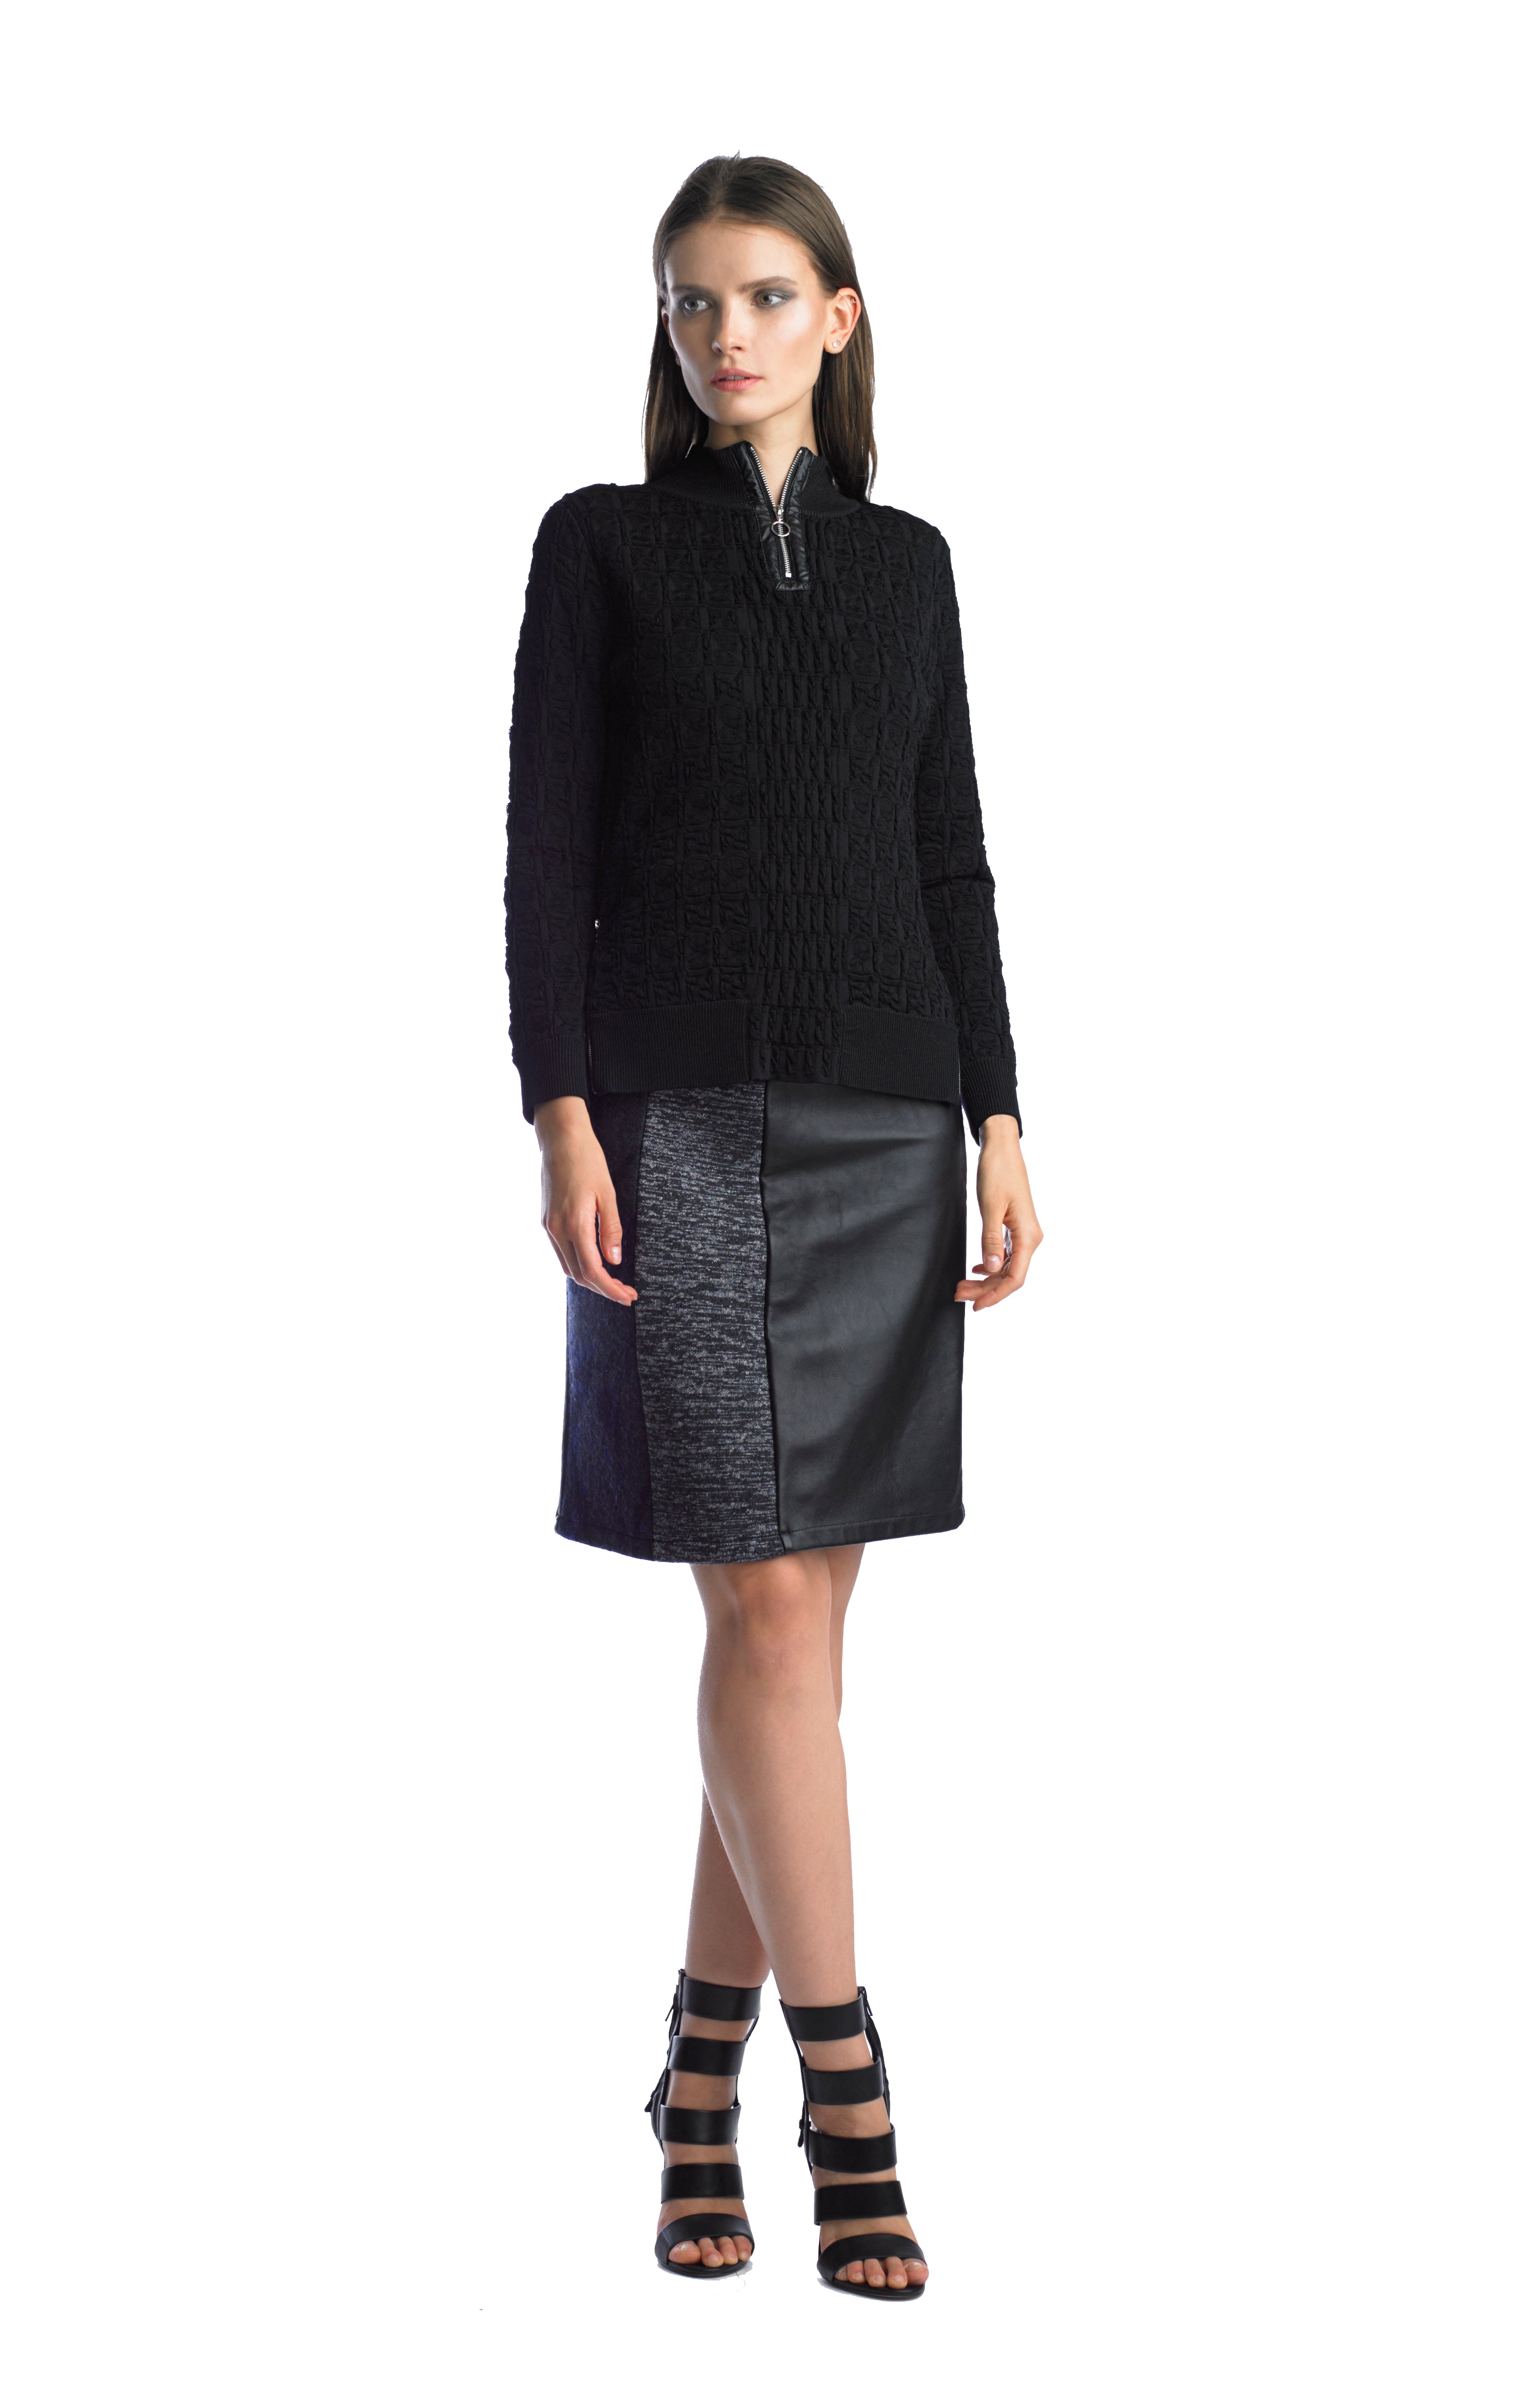 Historic New York Space Dye and Jacquard wool pencil Skirt - Historic New York